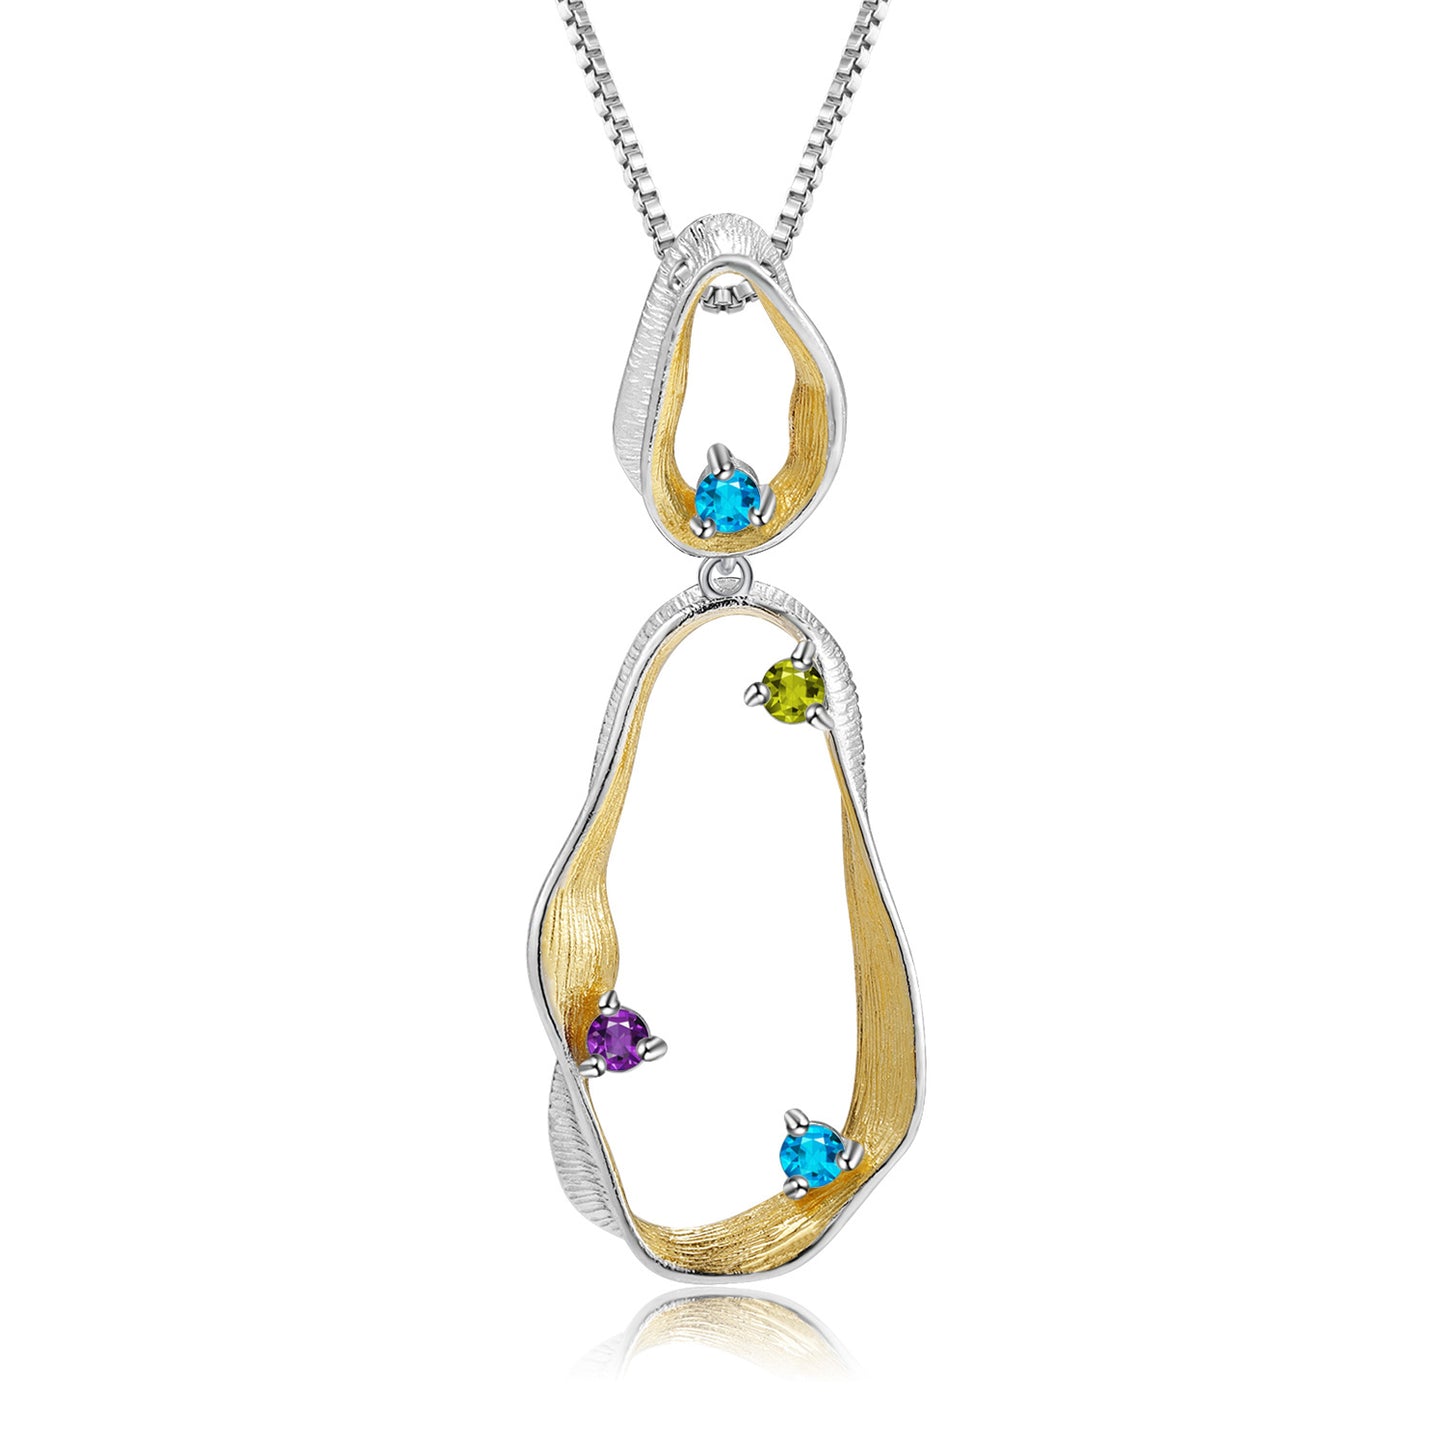 Italy Advanced Design with Natural Colourful Gemstones Pendant Sterling Silver Necklace for Women